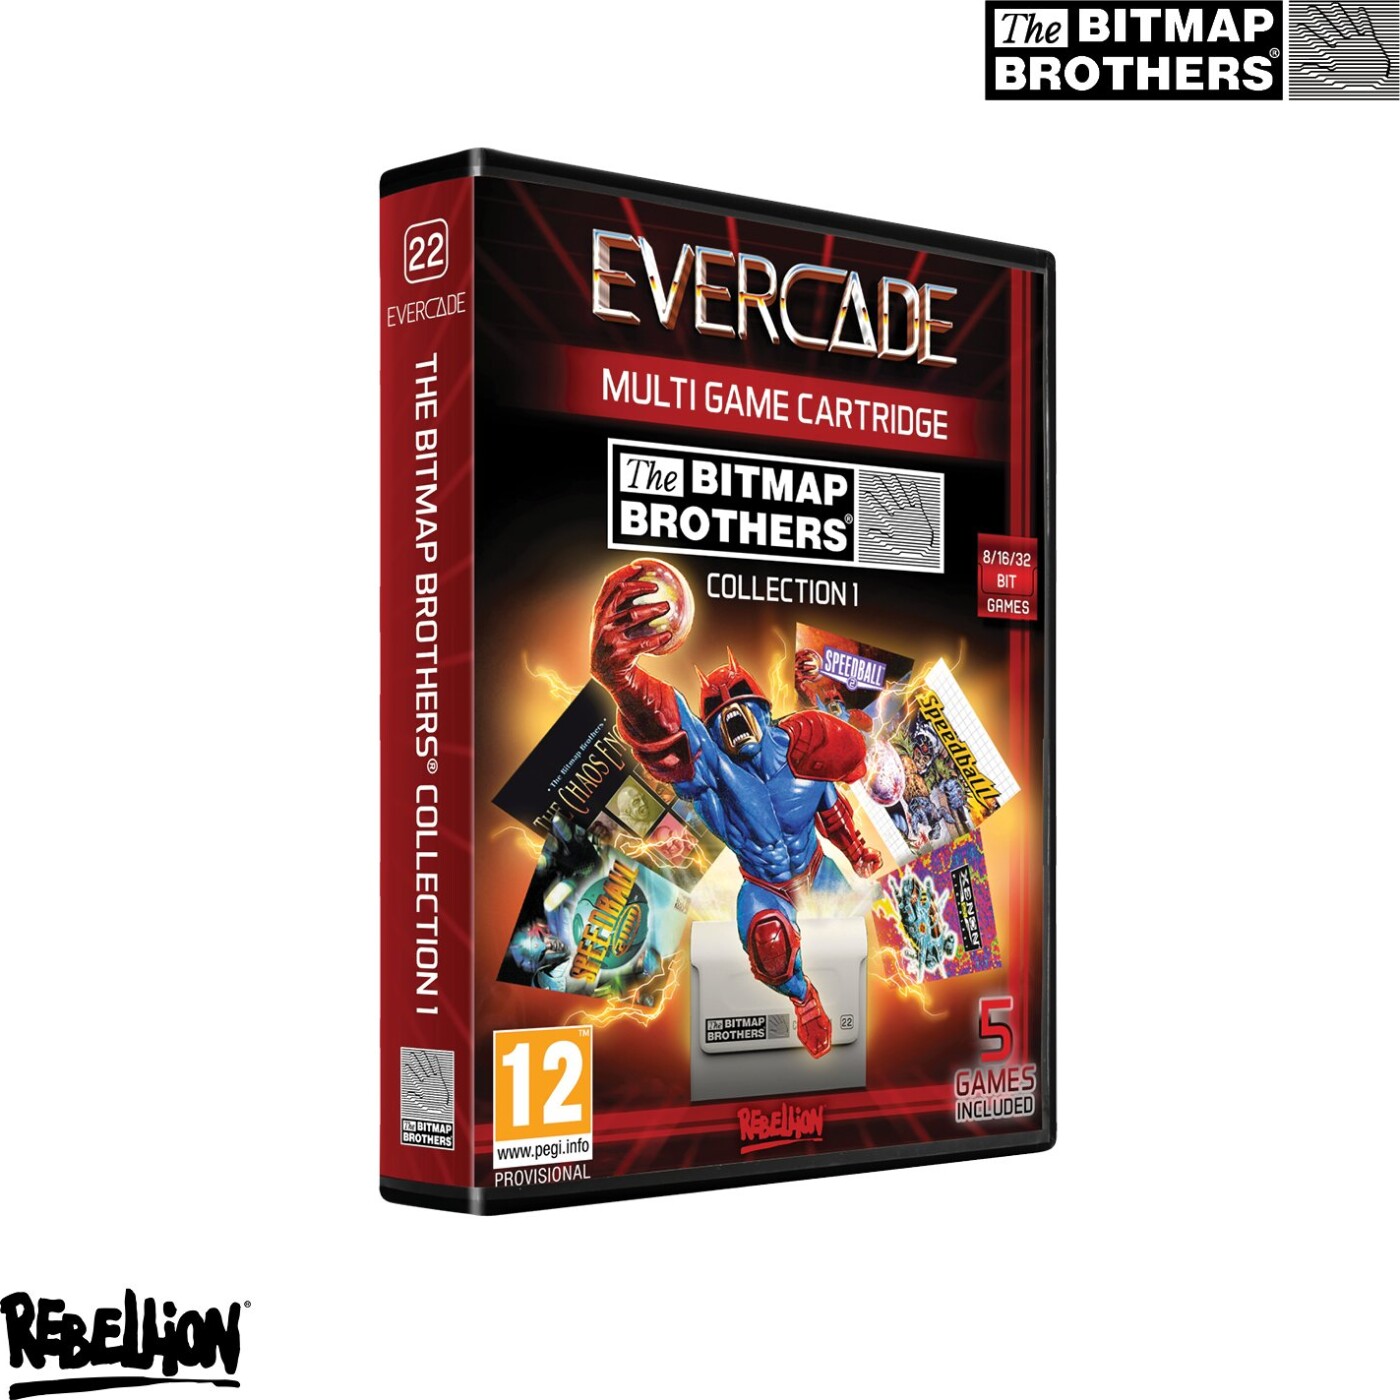 Evercade Multi Game Cartridge - The Bitmap Brothers Collection 1